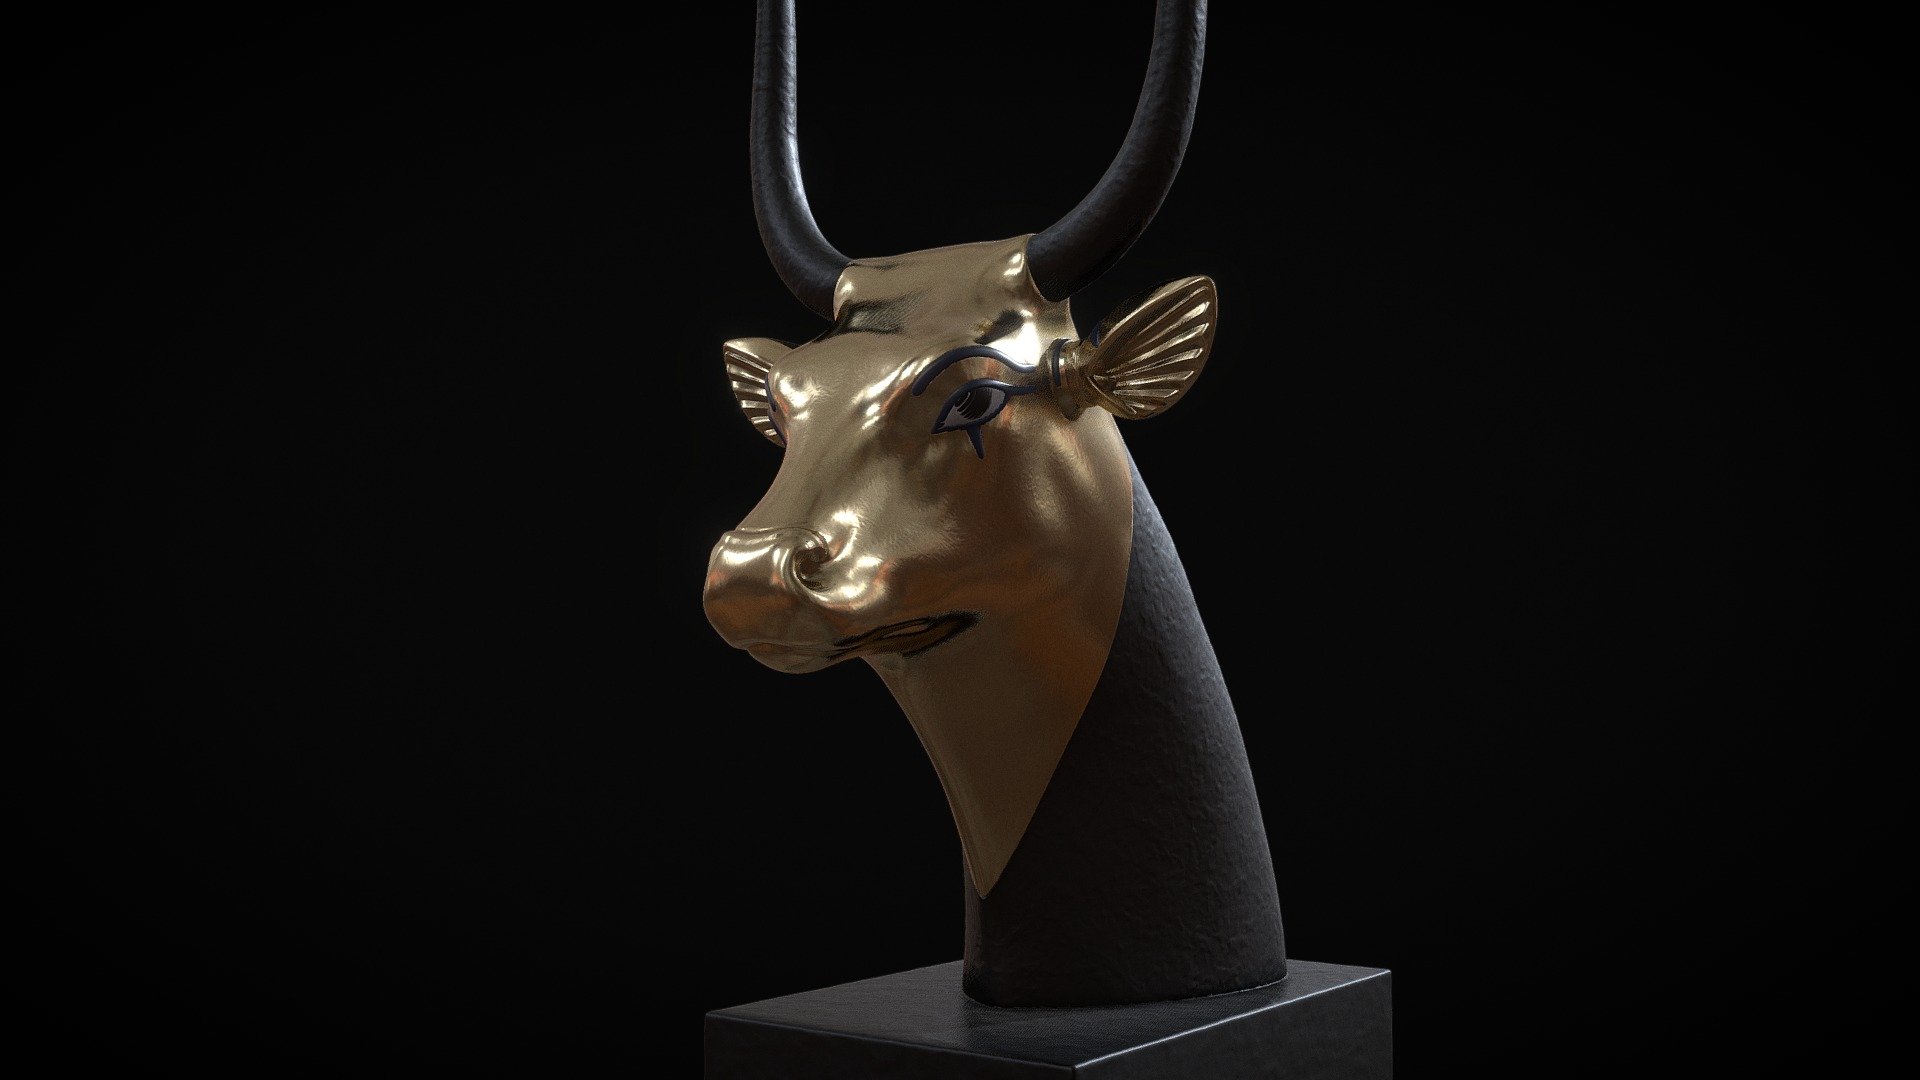 ** GILDED HEAD OF HATHOR - Egyptian Art from grave of Tutankhamun. 
This golden cow head represent the Goddess of the West, Hathor. The use of gold for the skin of the face represents the immortality of the Gods and Goddesses.

Highpoly
FBX
No textures
Let me know if you have any requests.

Enjoy! - Hathor Cow Head - GILDED HEAD OF HATHOR - Buy Royalty Free 3D model by Omassyx 3d model